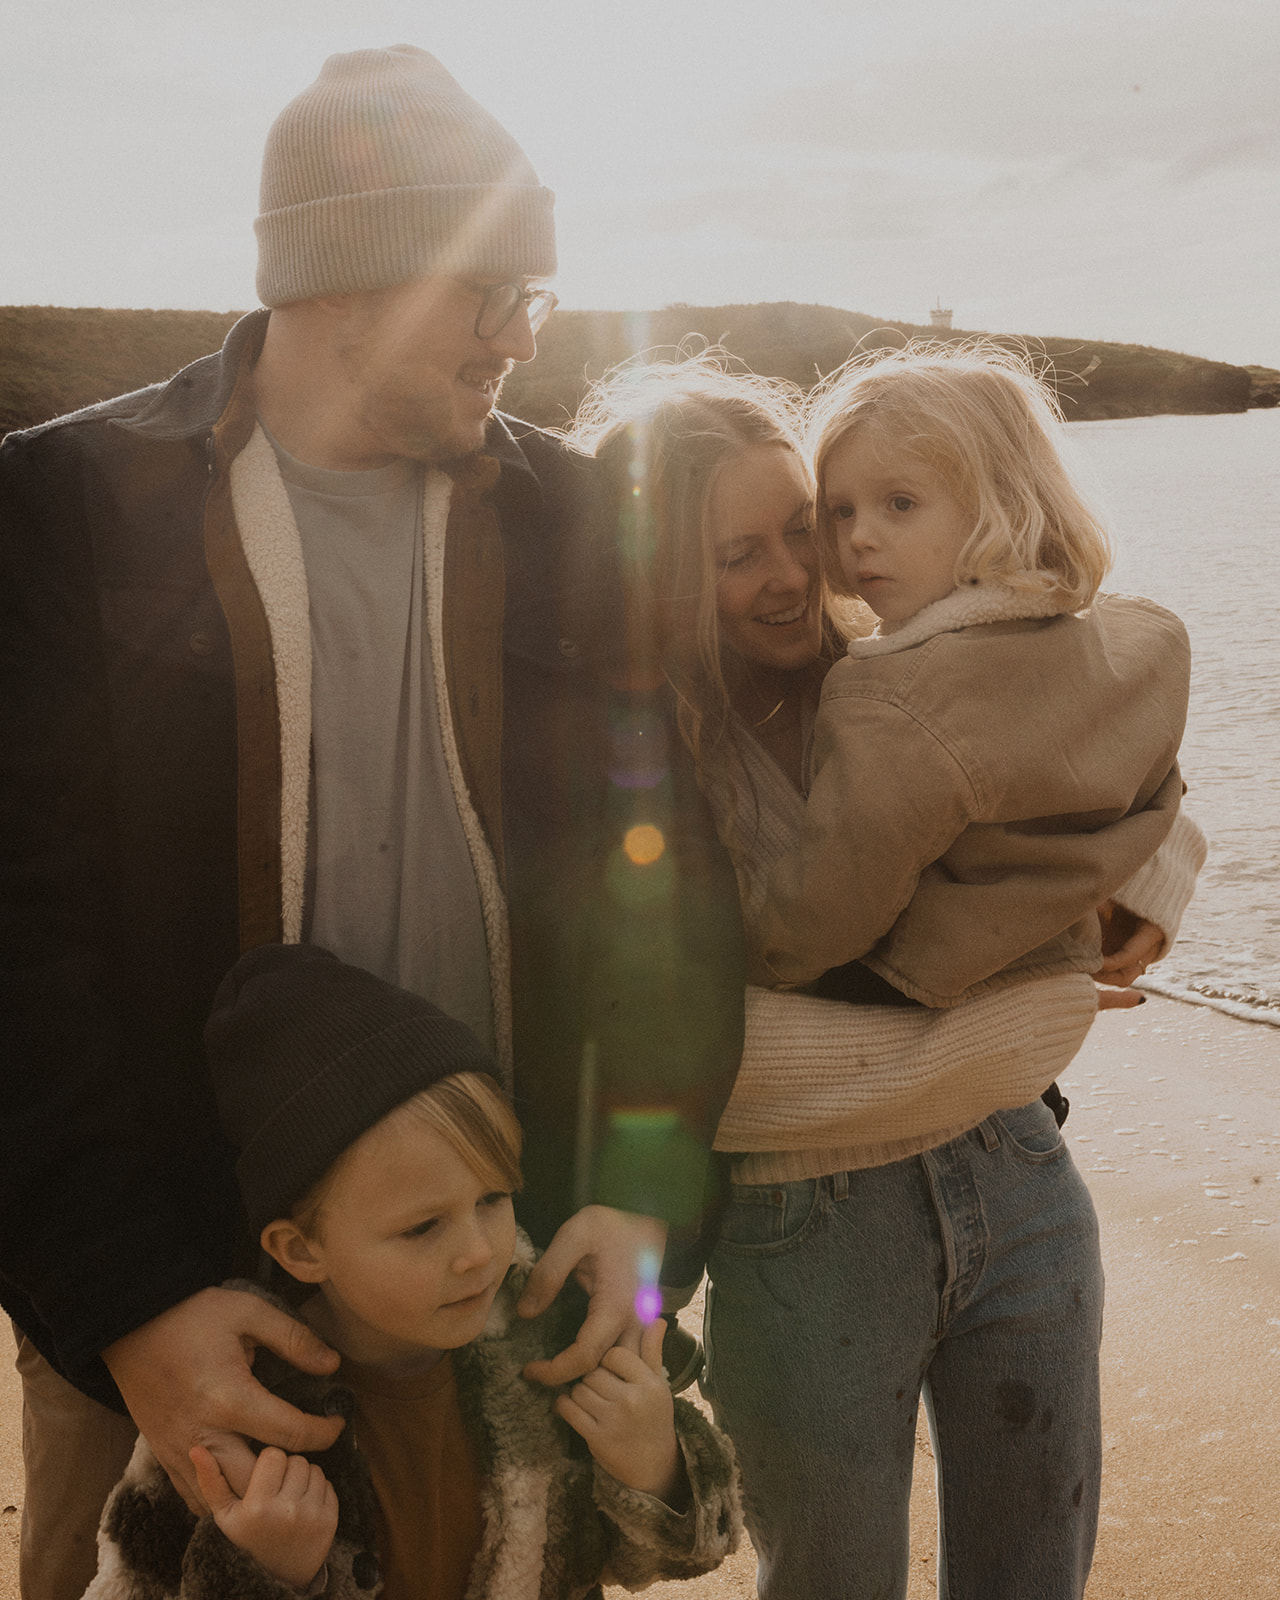 I loved meeting and photographing this sweet family on a sunny December weekend at Elie Beach in Fife! Fife Family Photo